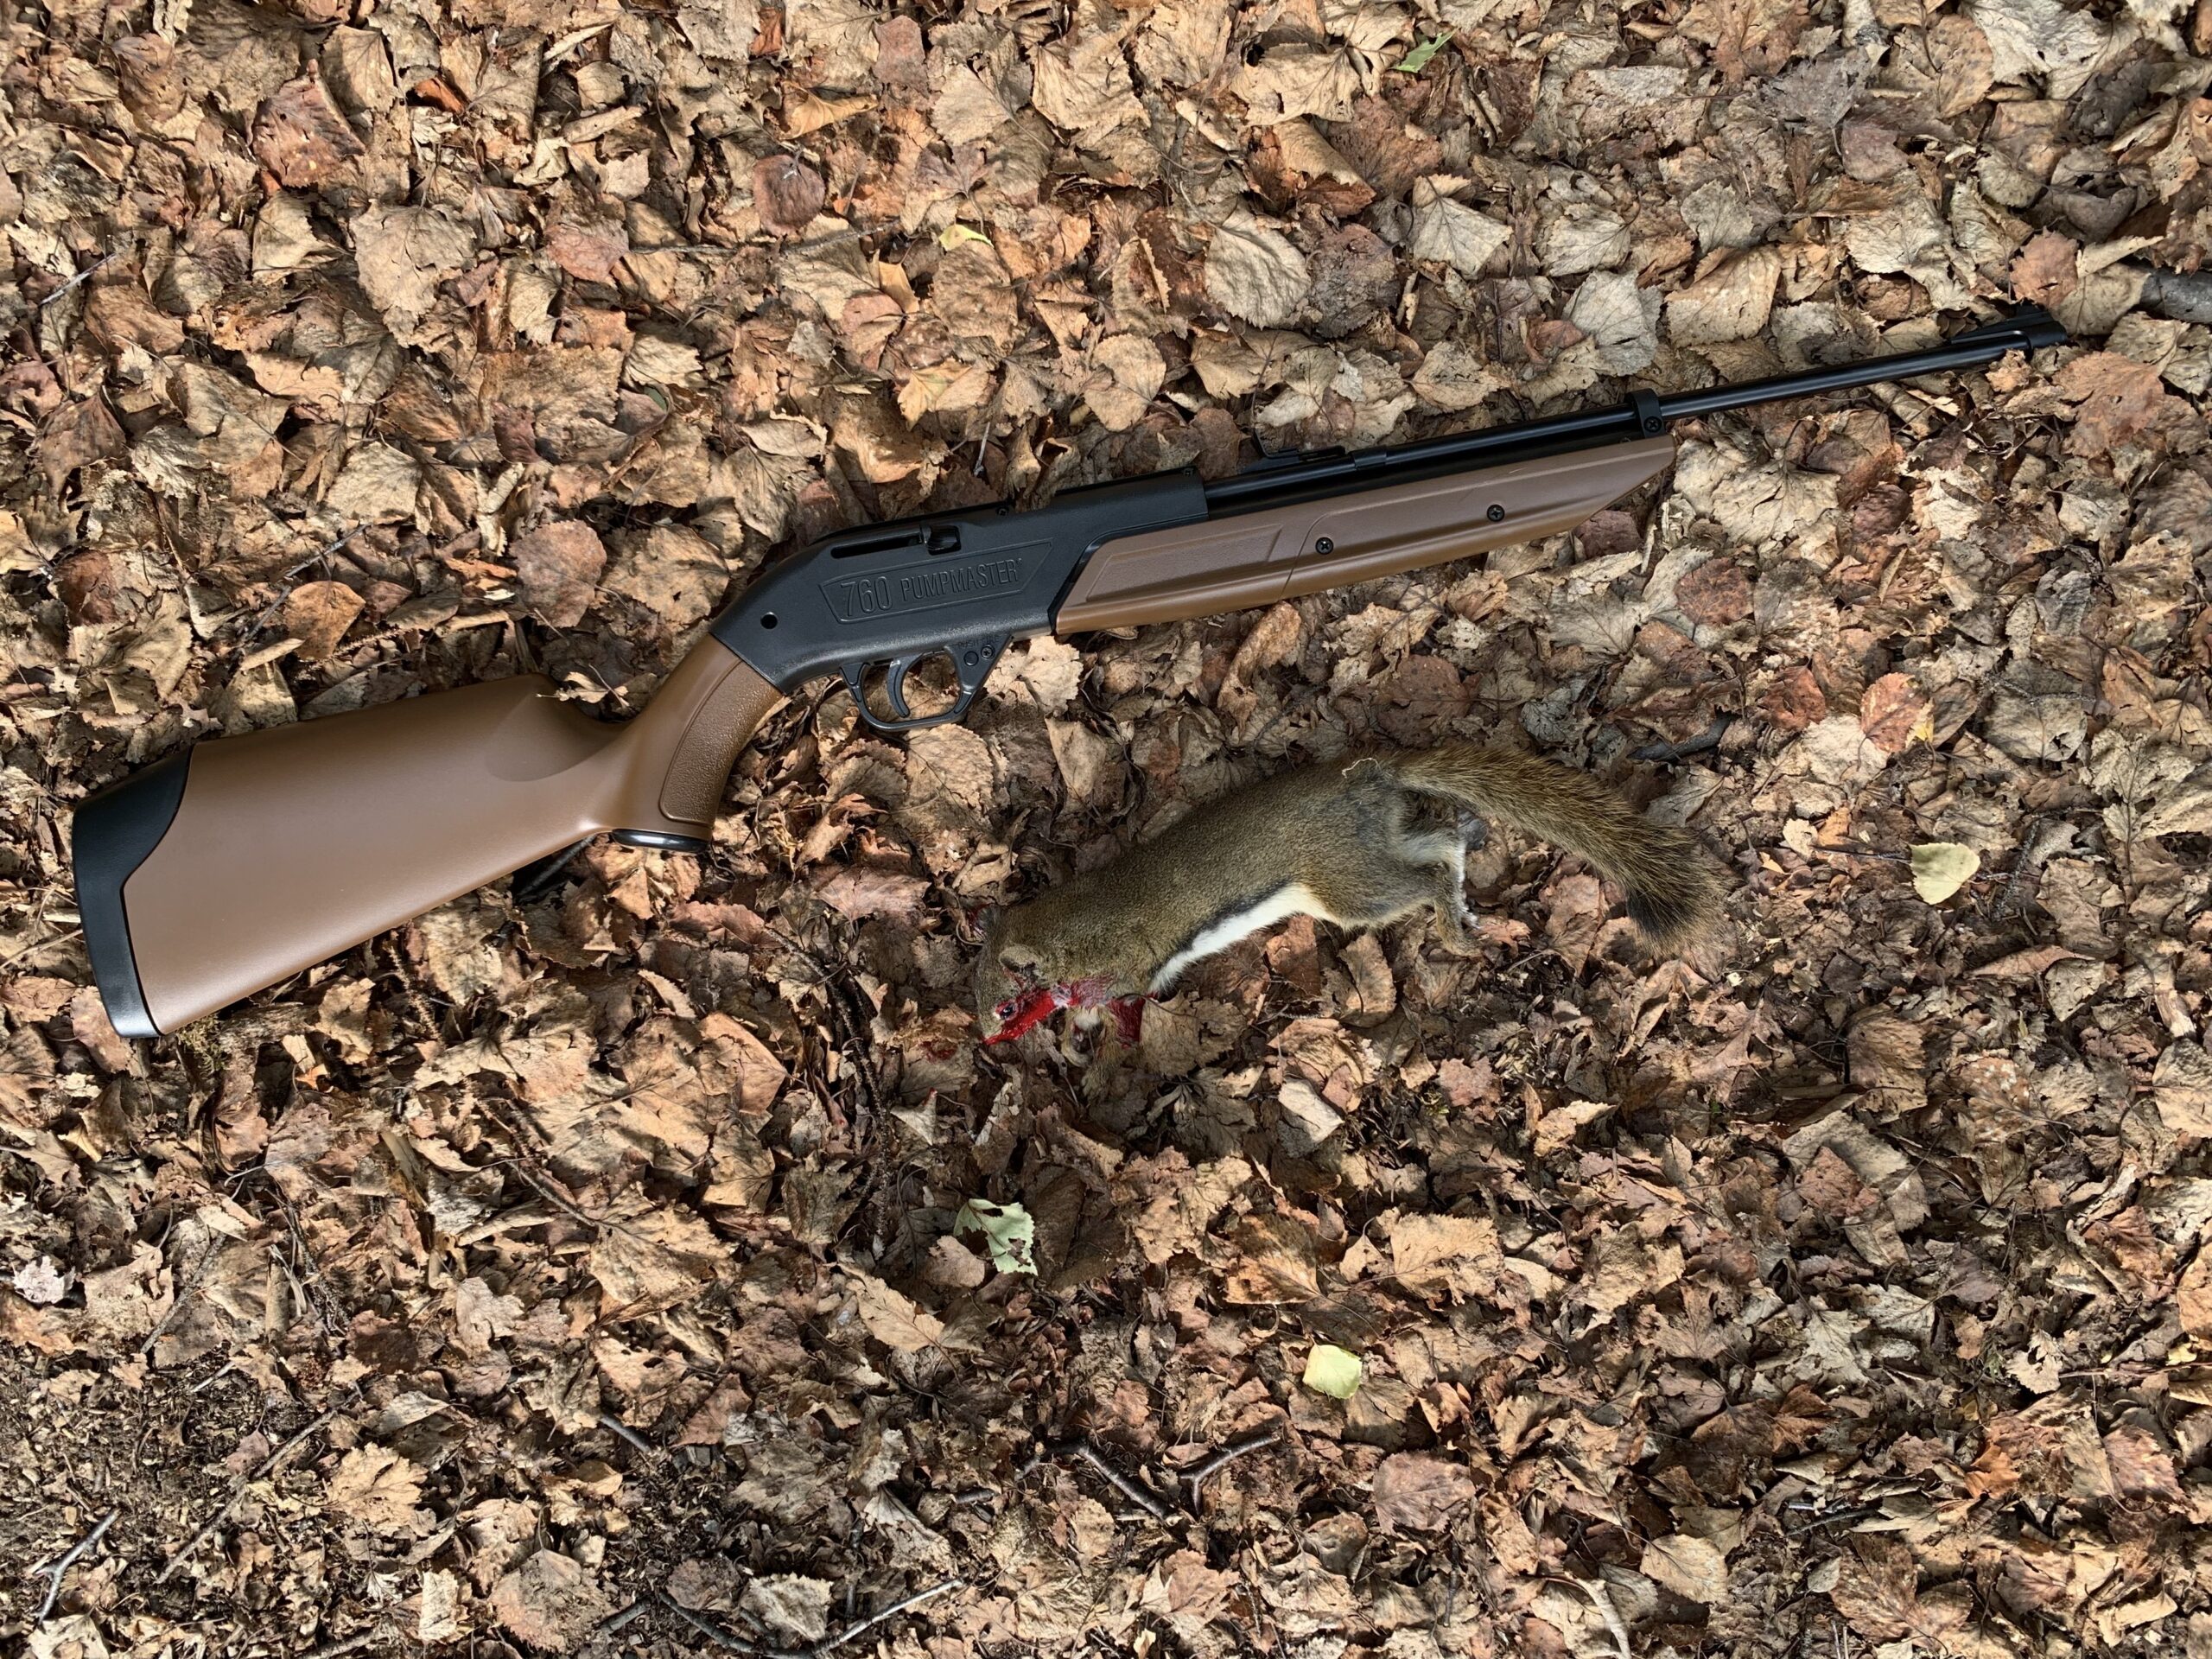 The Crossman 760 is the best bb gun for squirrels